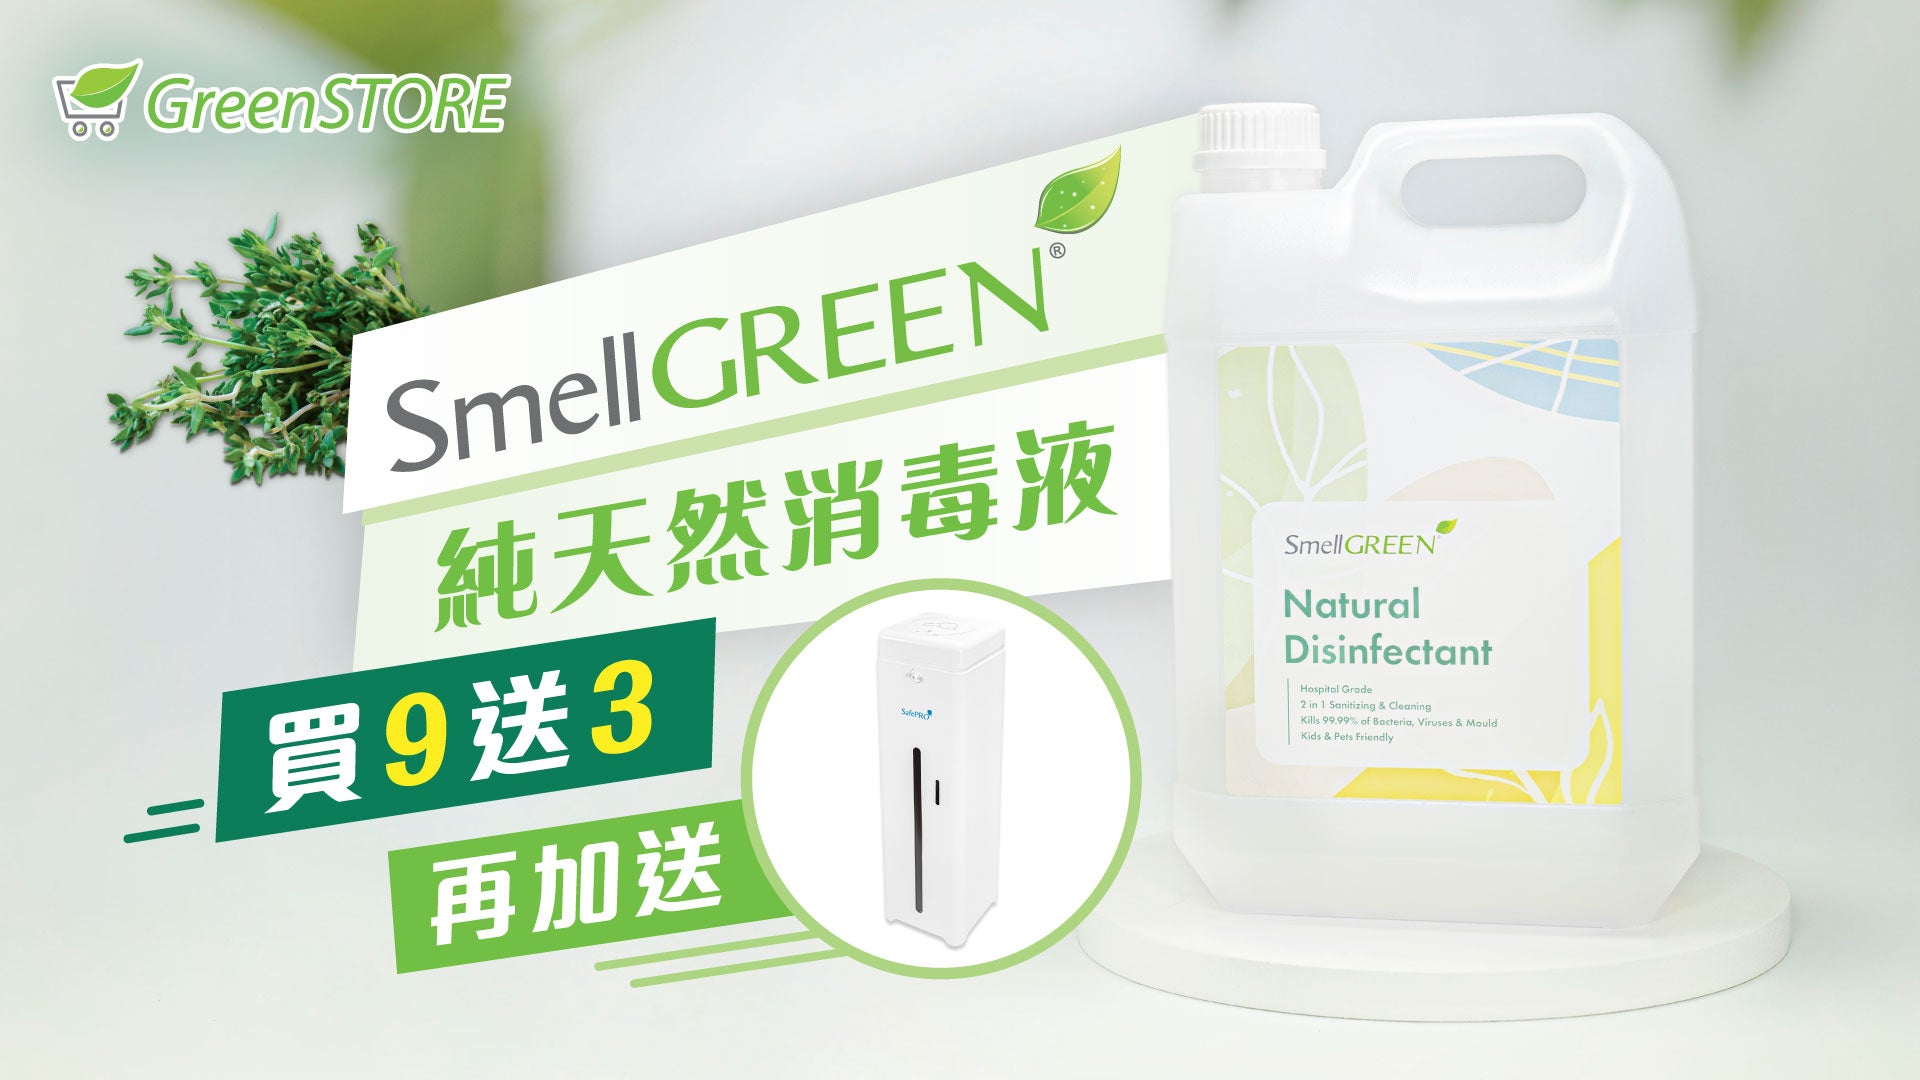 【Combo Discount】Buy 9 Gallons of SmellGREEN® Disinfectant to Get 3 Gallons with A Toilet Disinfectant Dispenser For FREE